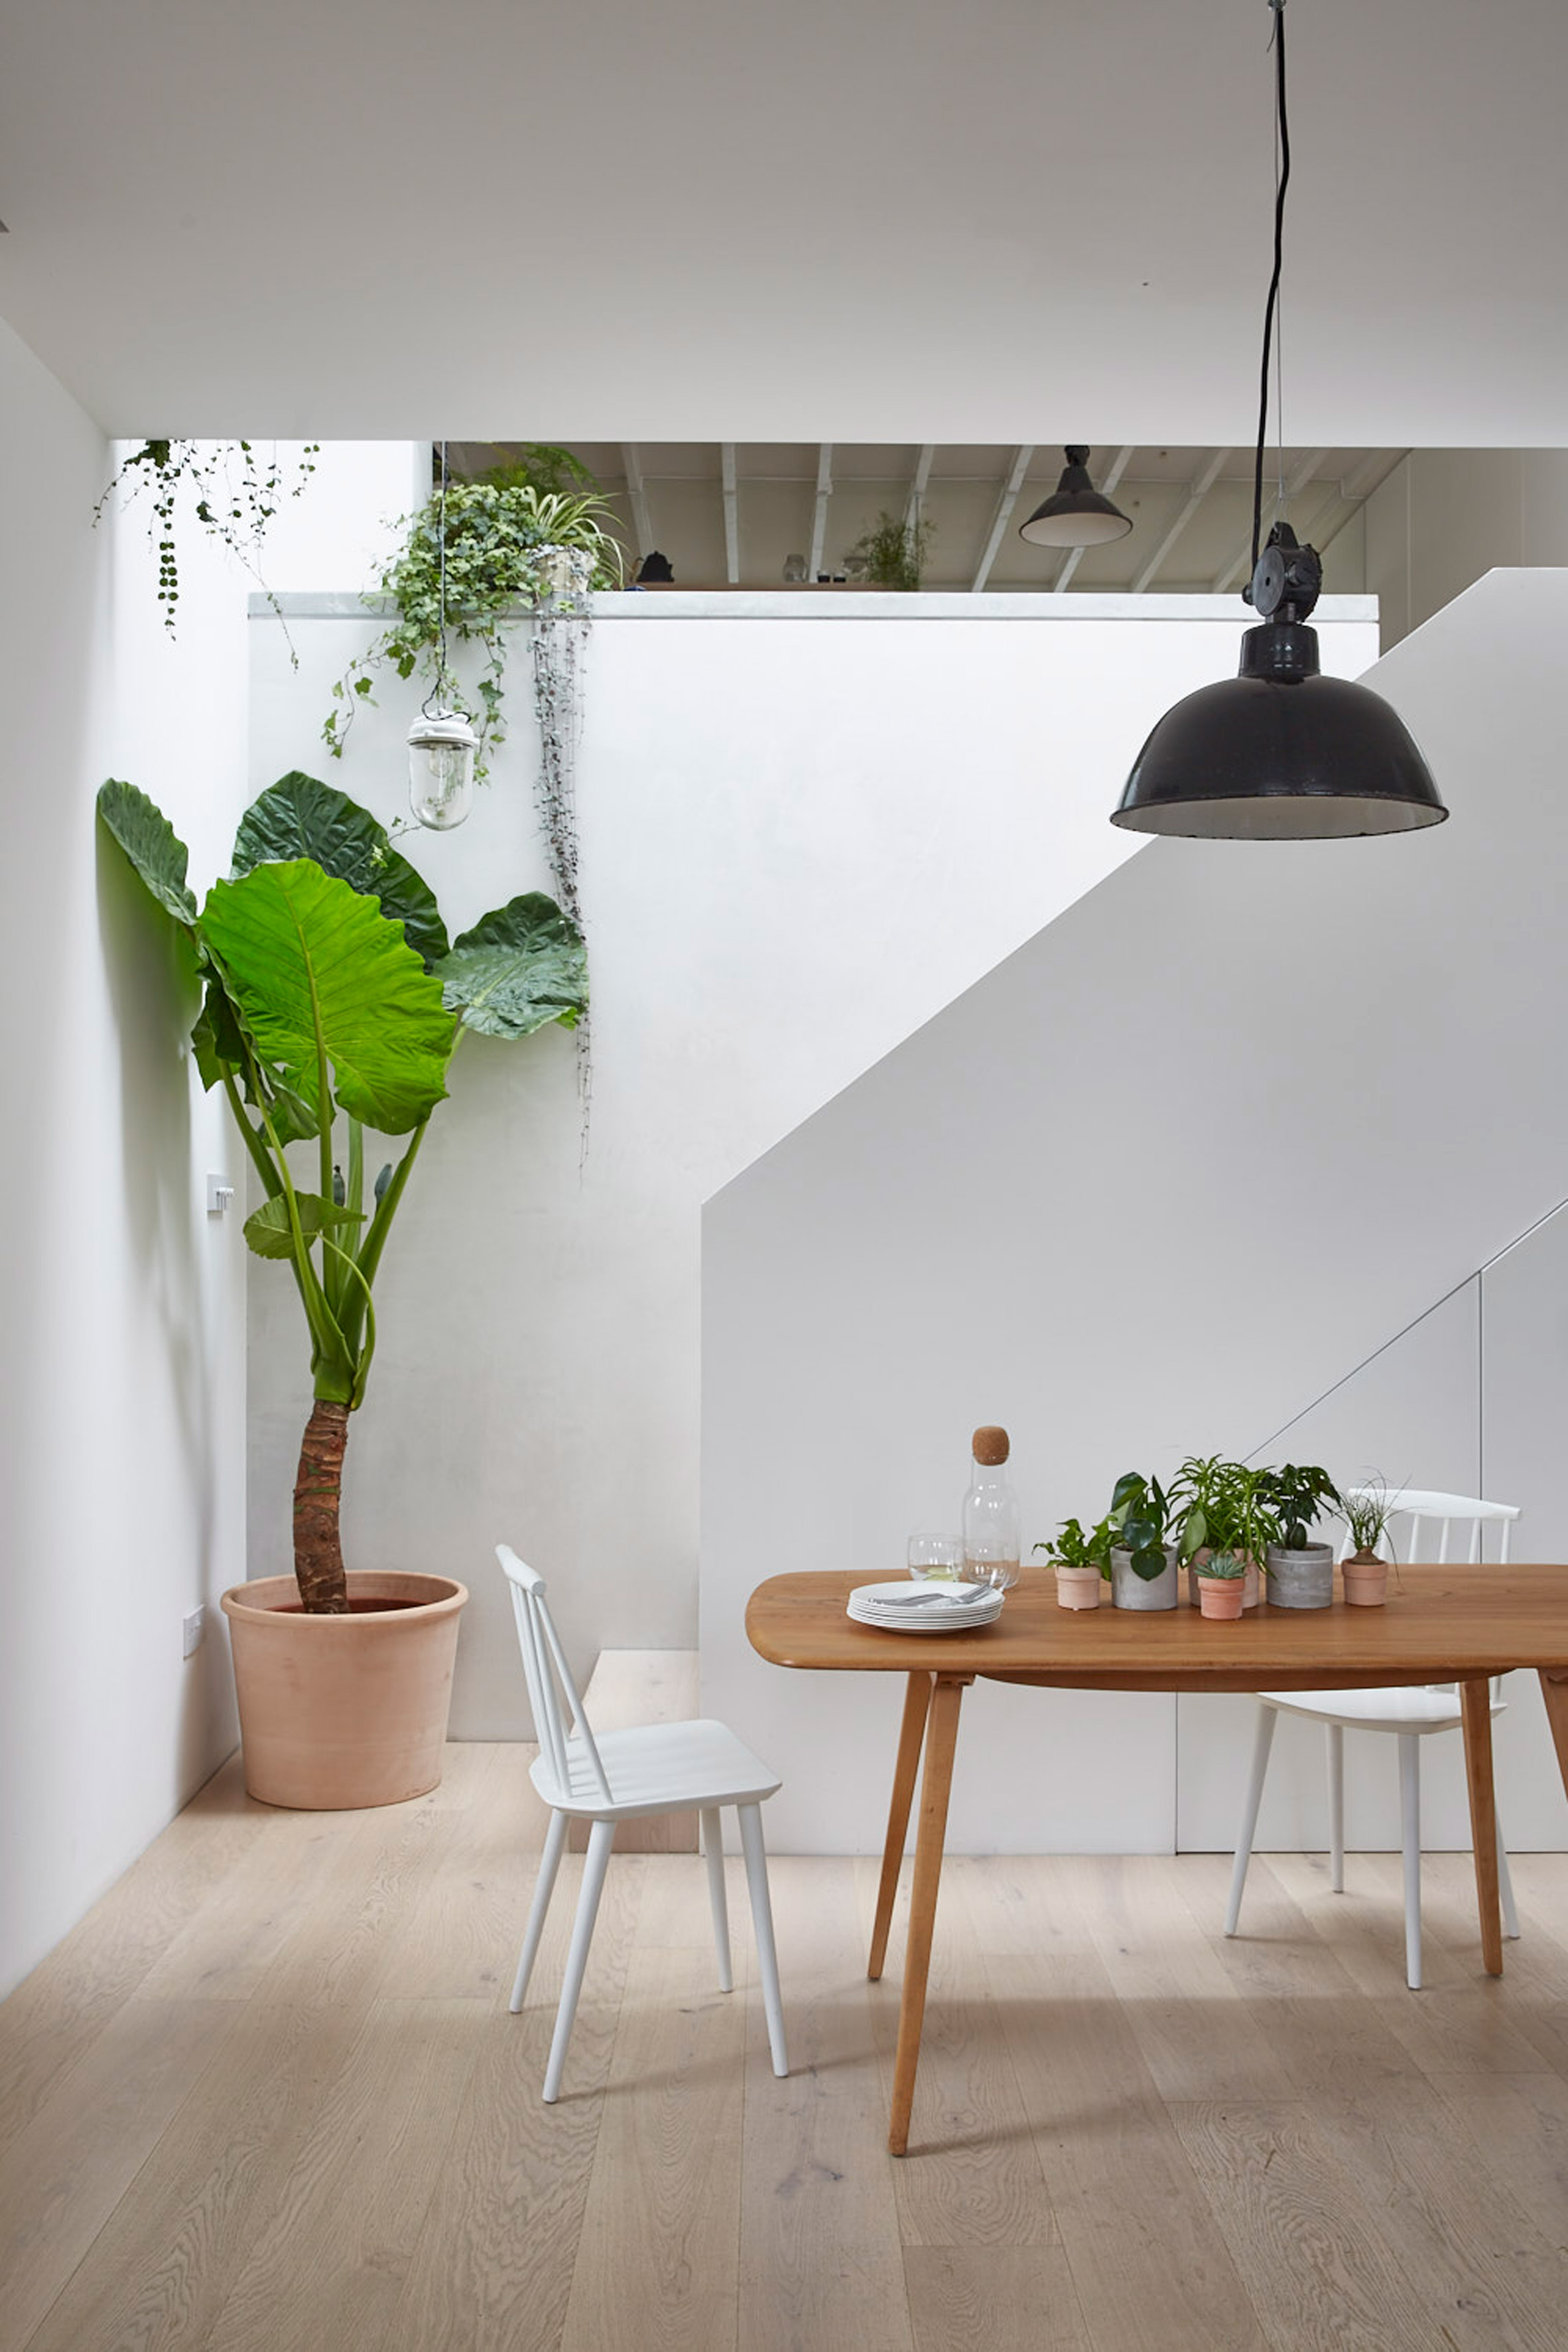 Hutch Design reconfigures Hackney mews to create space-saving family home